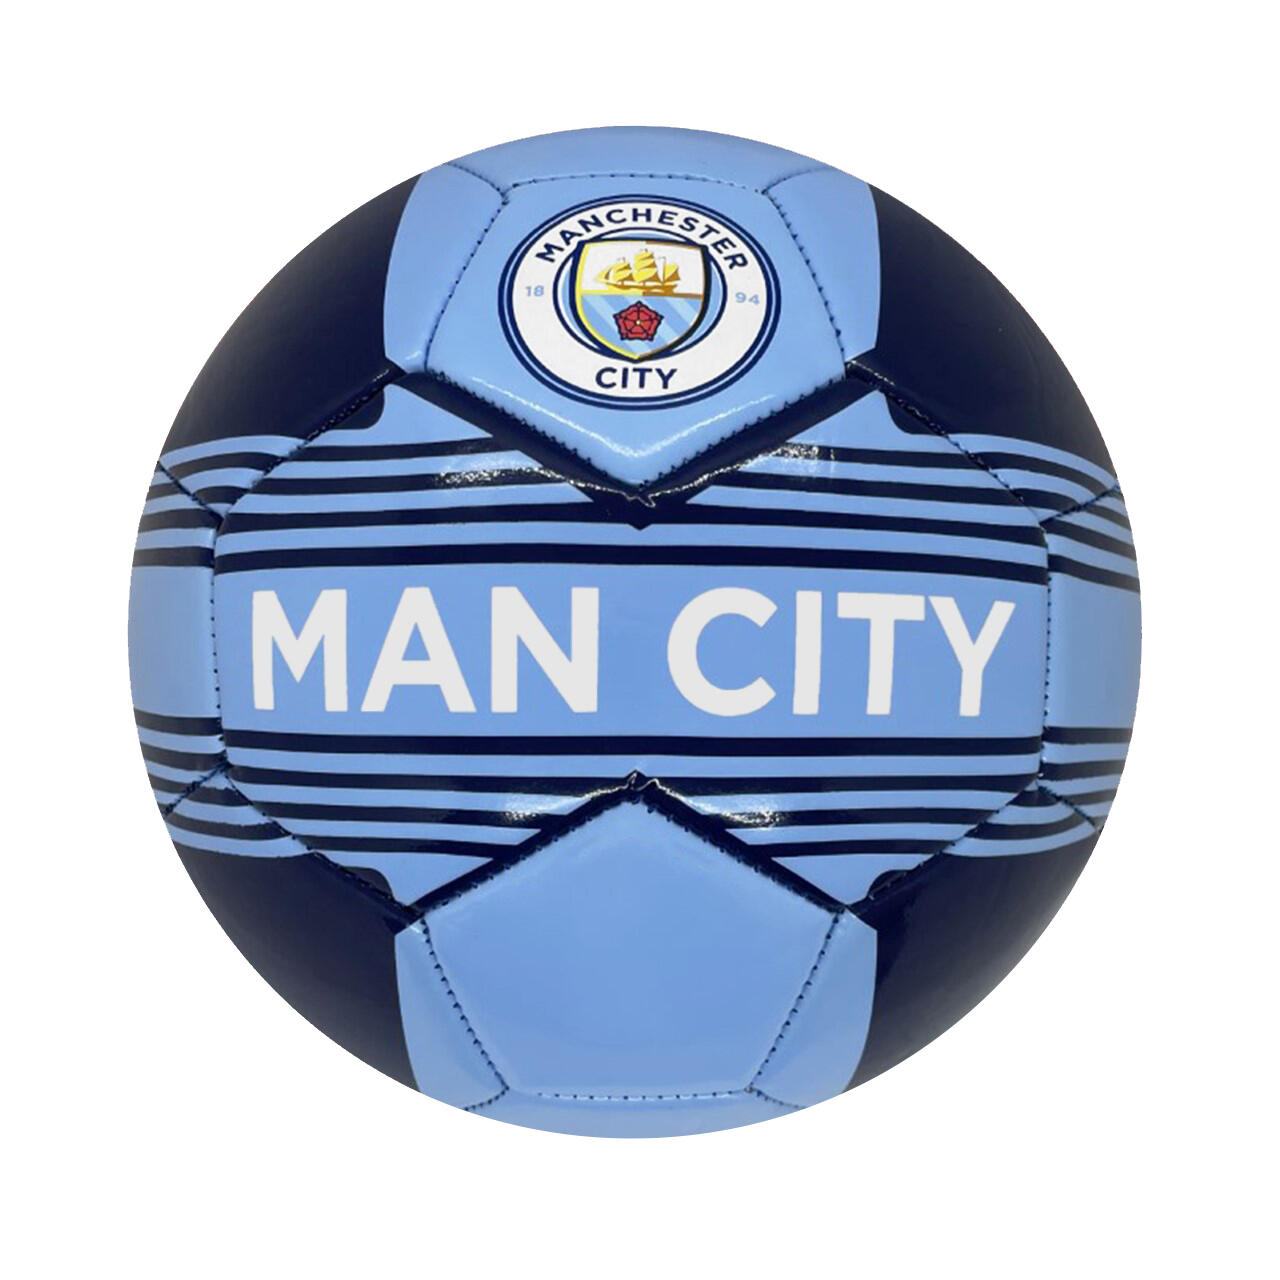 MANCHESTER CITY Manchester City Football Size 4 Crest Blue OFFICIAL Gift